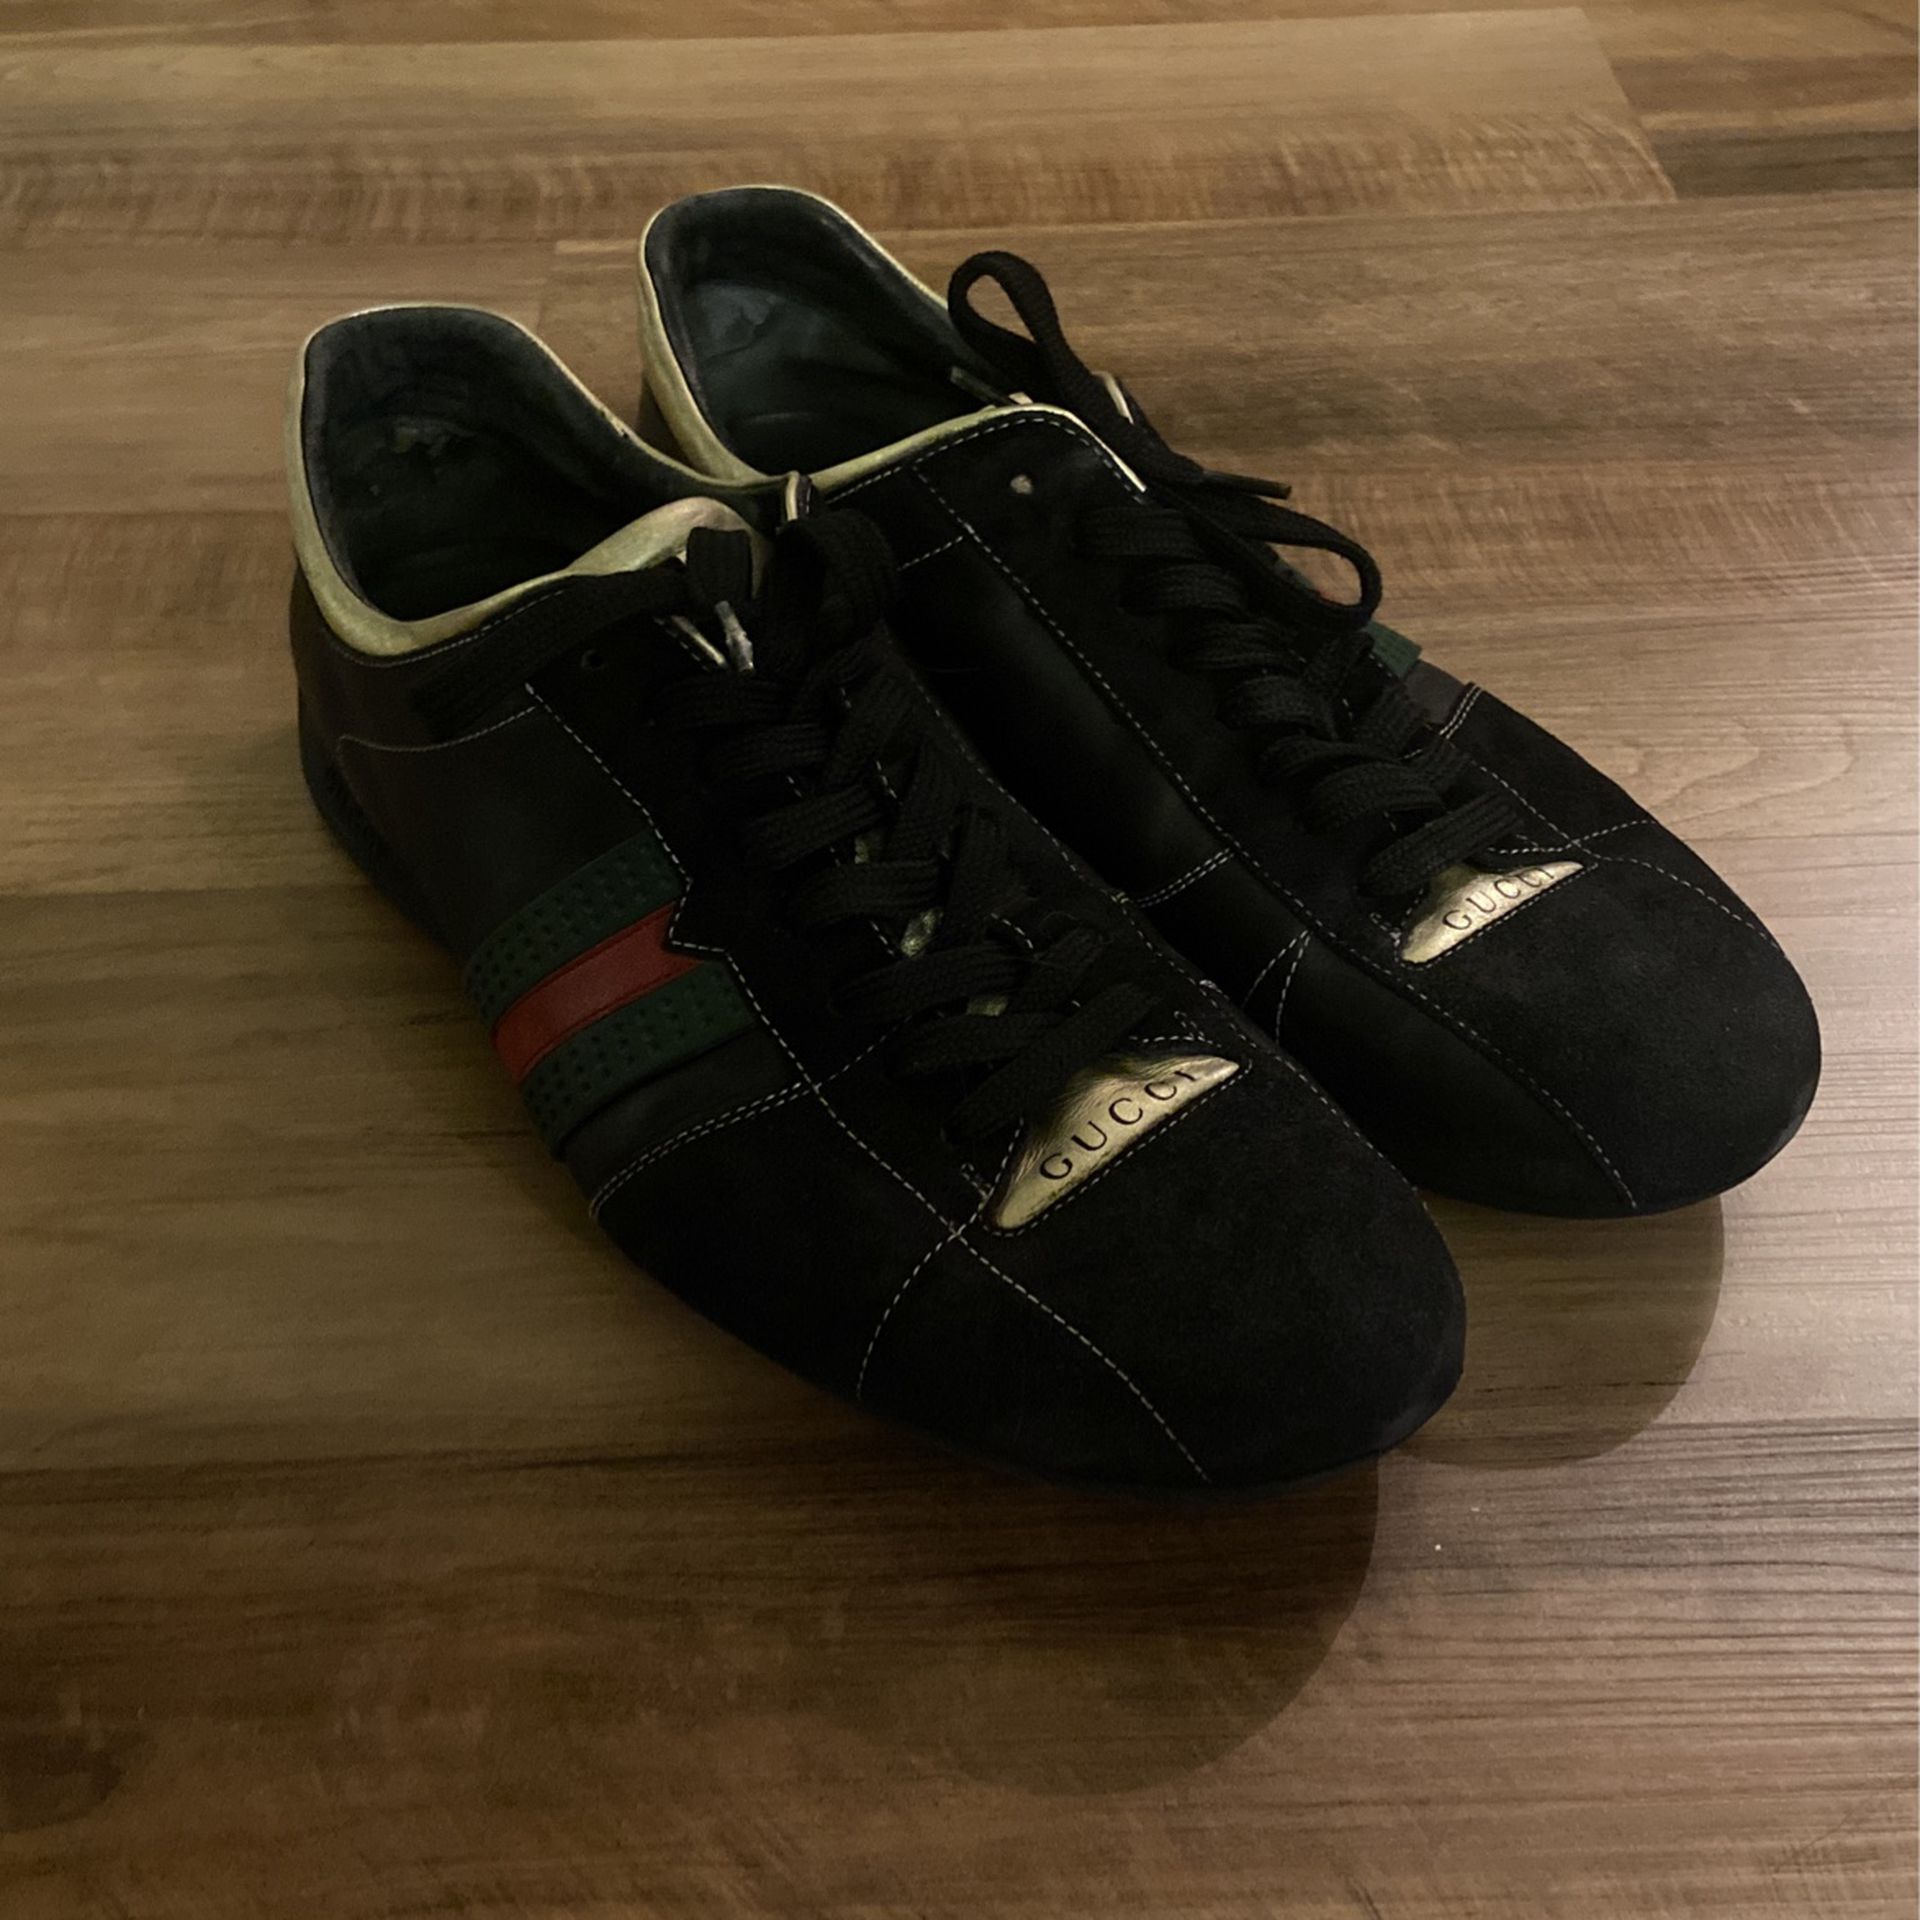 Gucci Men's Shoes 162677 for Sale in Seattle, WA - OfferUp